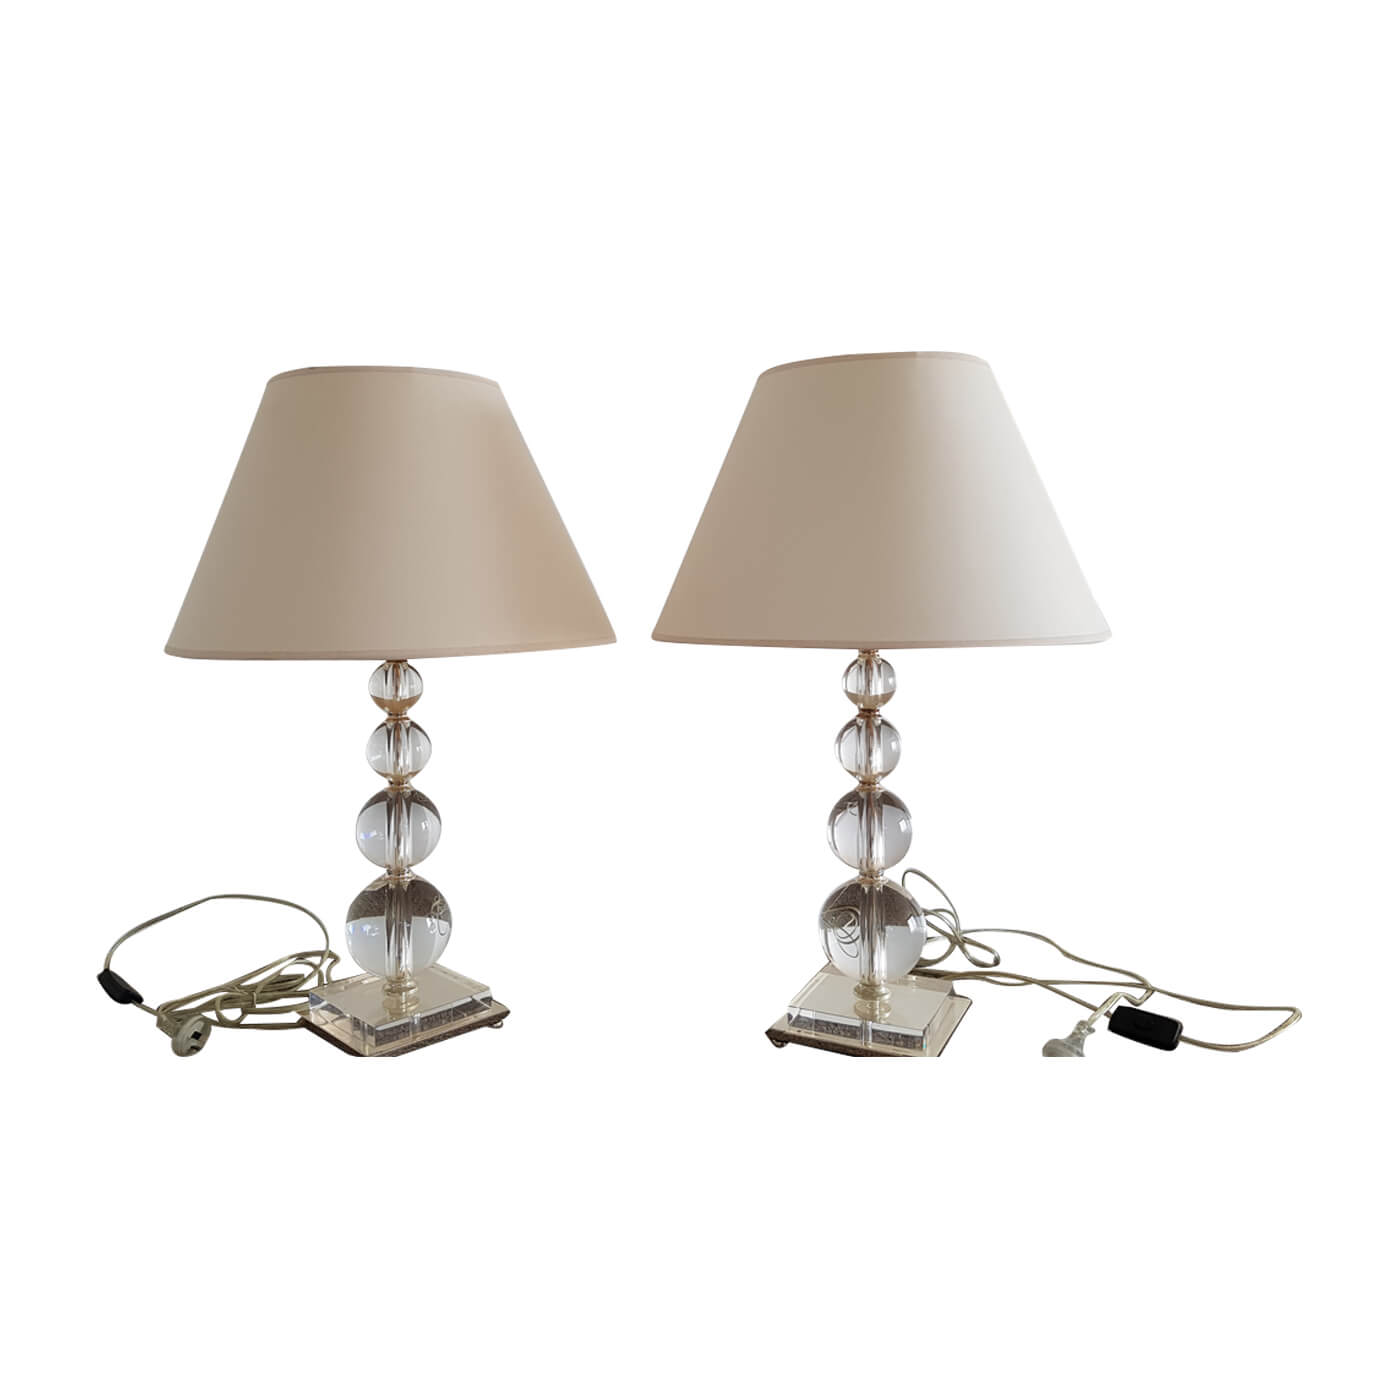 Bloomingdales Table Lamps With Glass, Bloomingdales Table Lamps